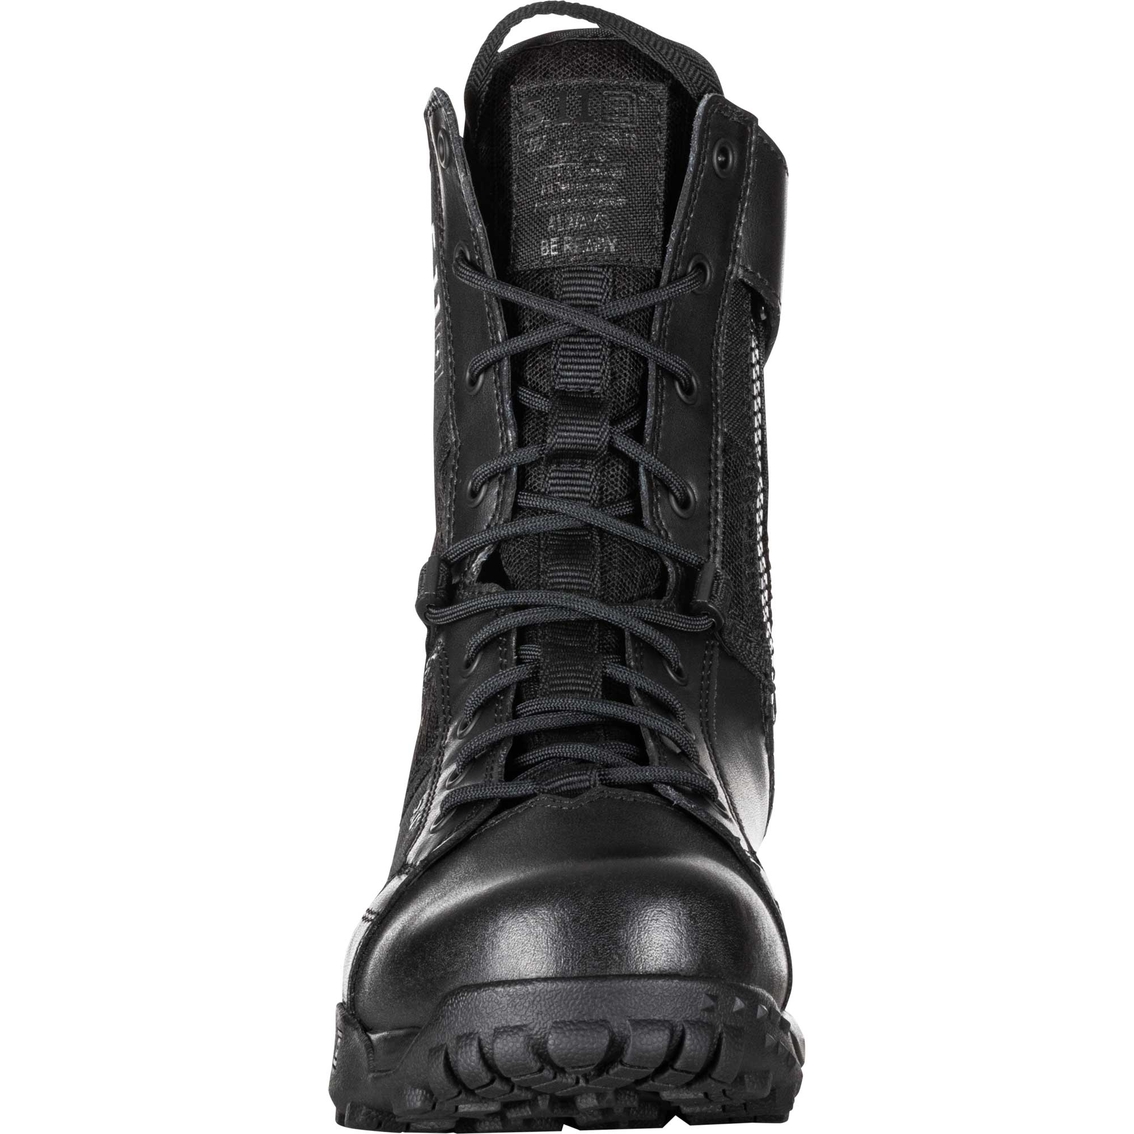 5.11 Men's AT 8 Side Zip Boots - Image 4 of 6